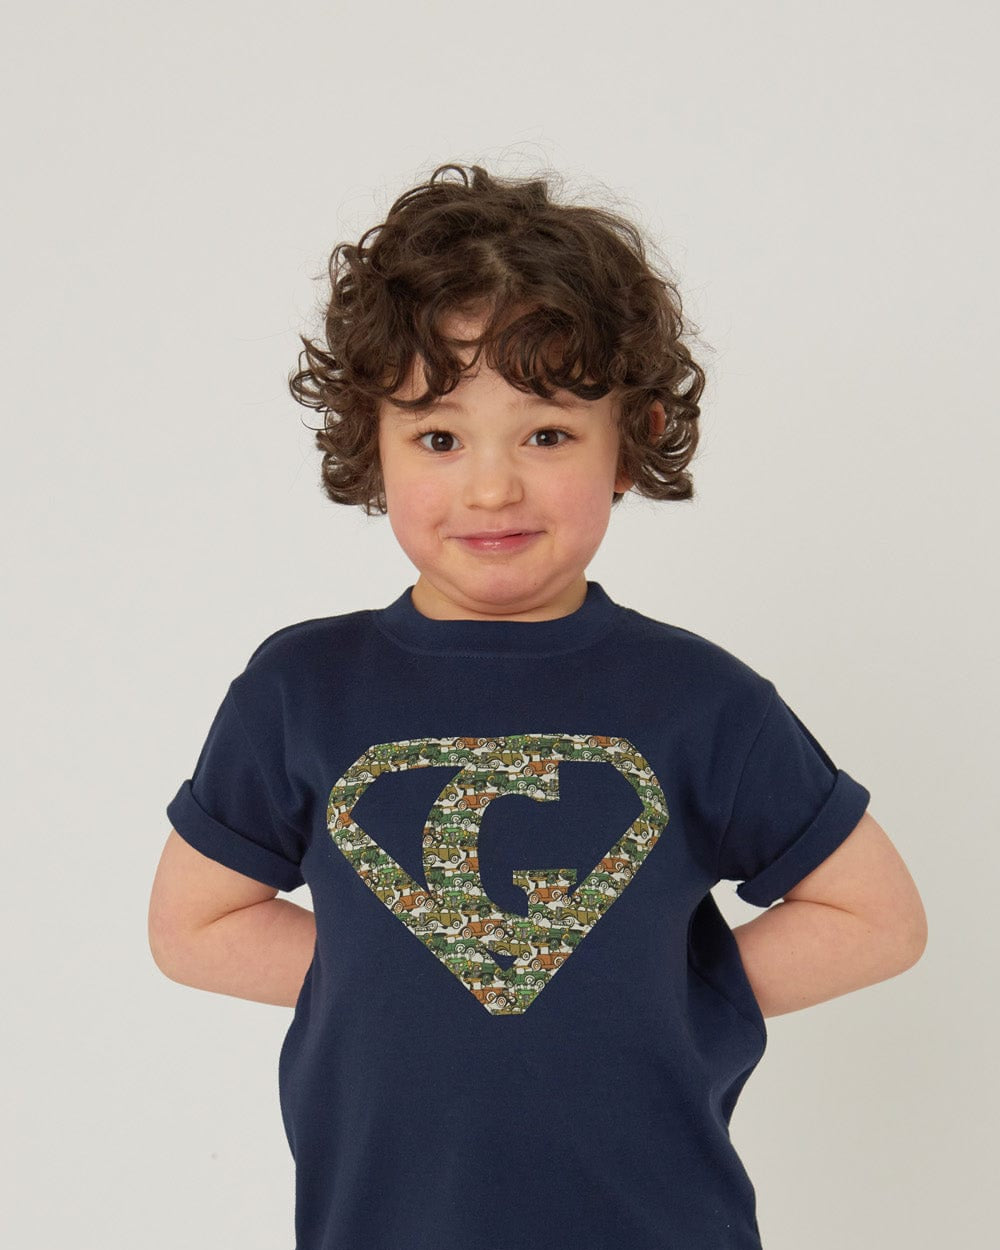 Magnificent Stanley Tee Superhero T-Shirt in choice of Liberty Print